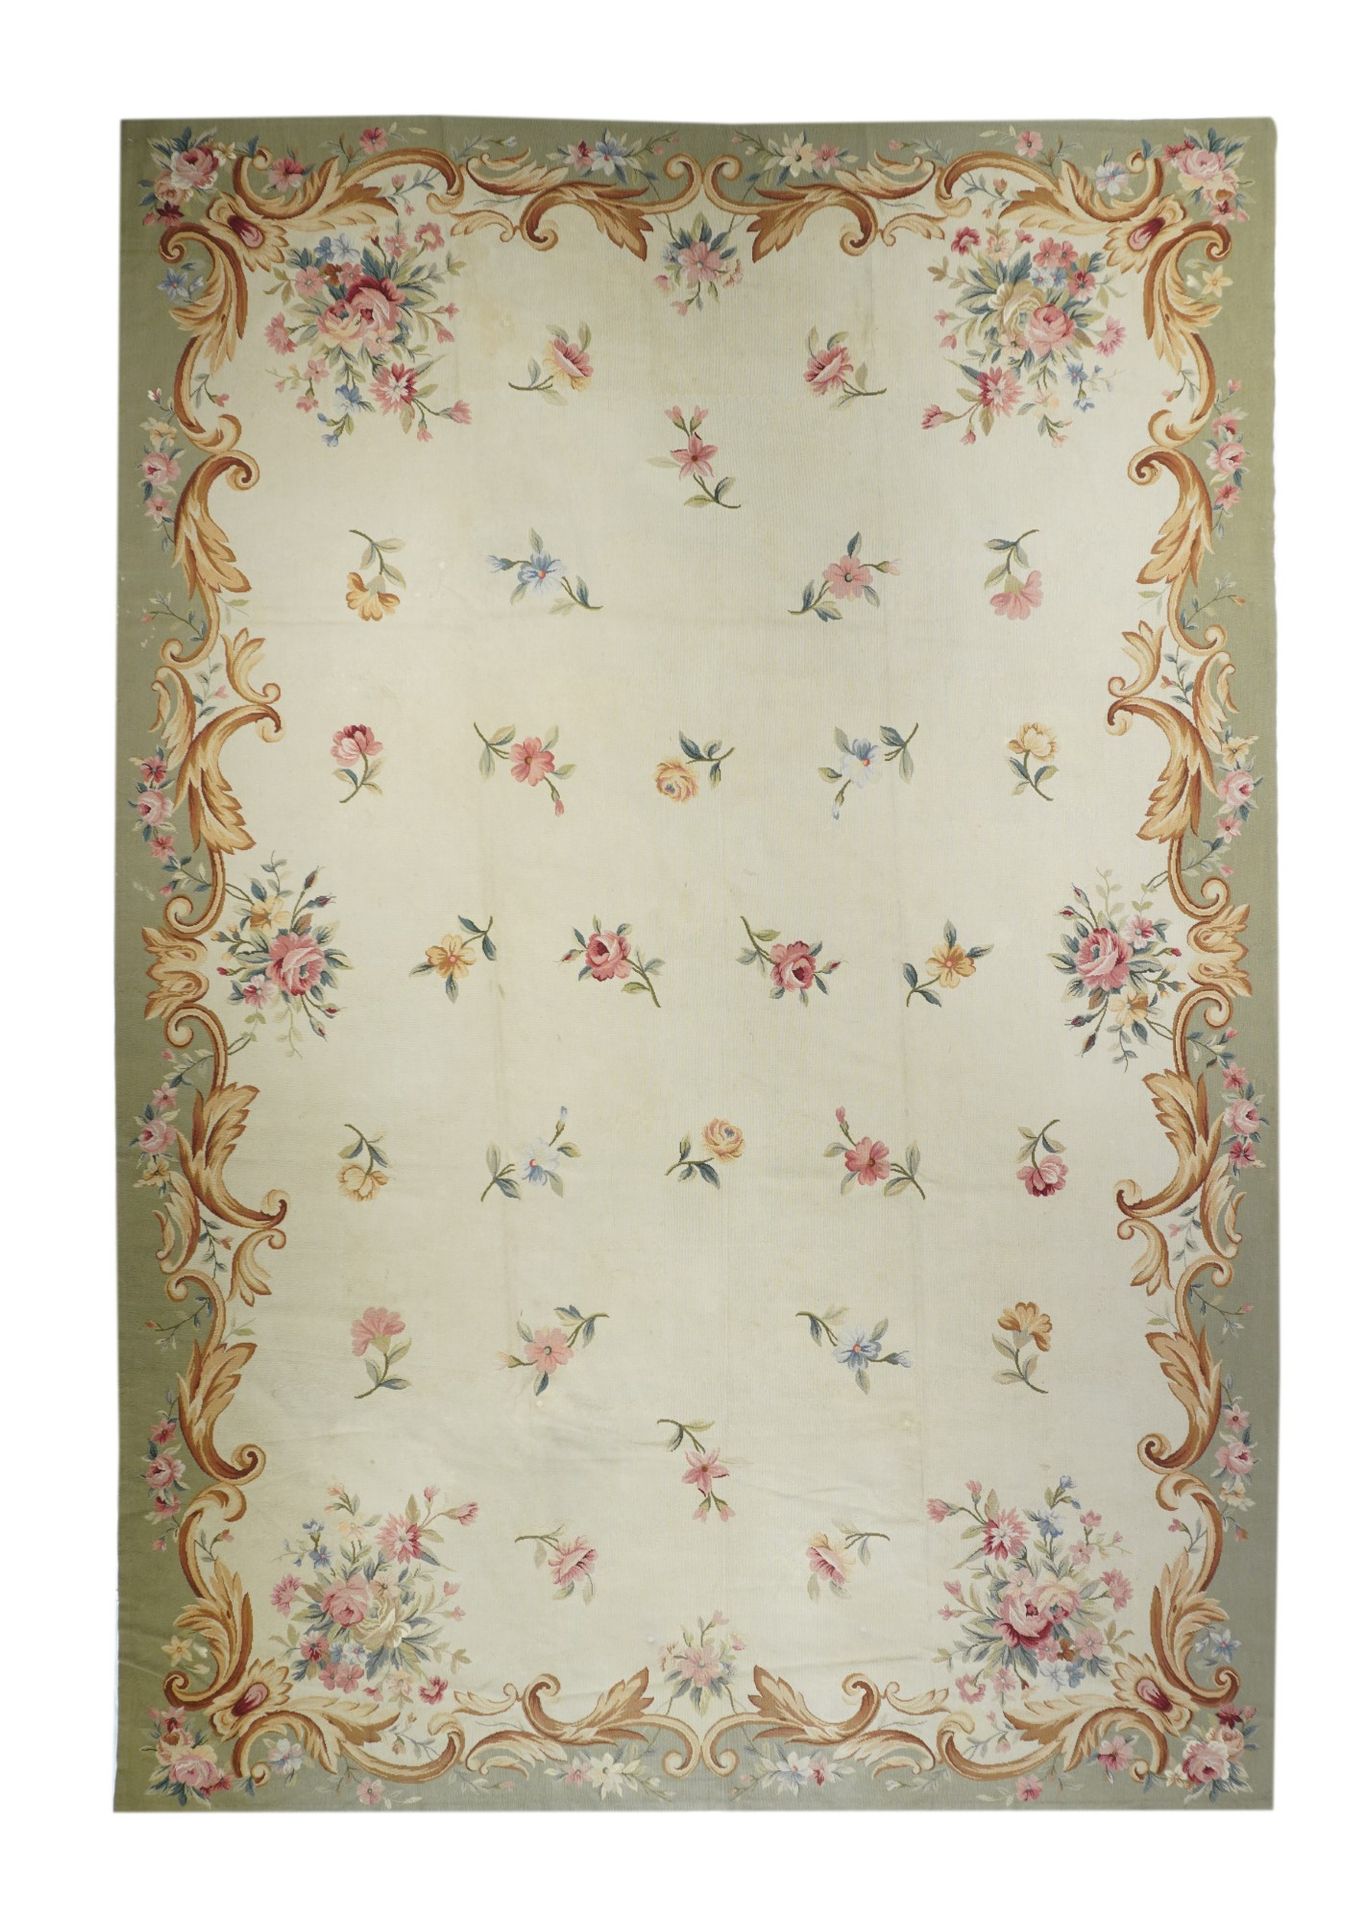 Null Needle Point Rug, 9'6" x 13'8" ( 2.90 x 4.17 M )